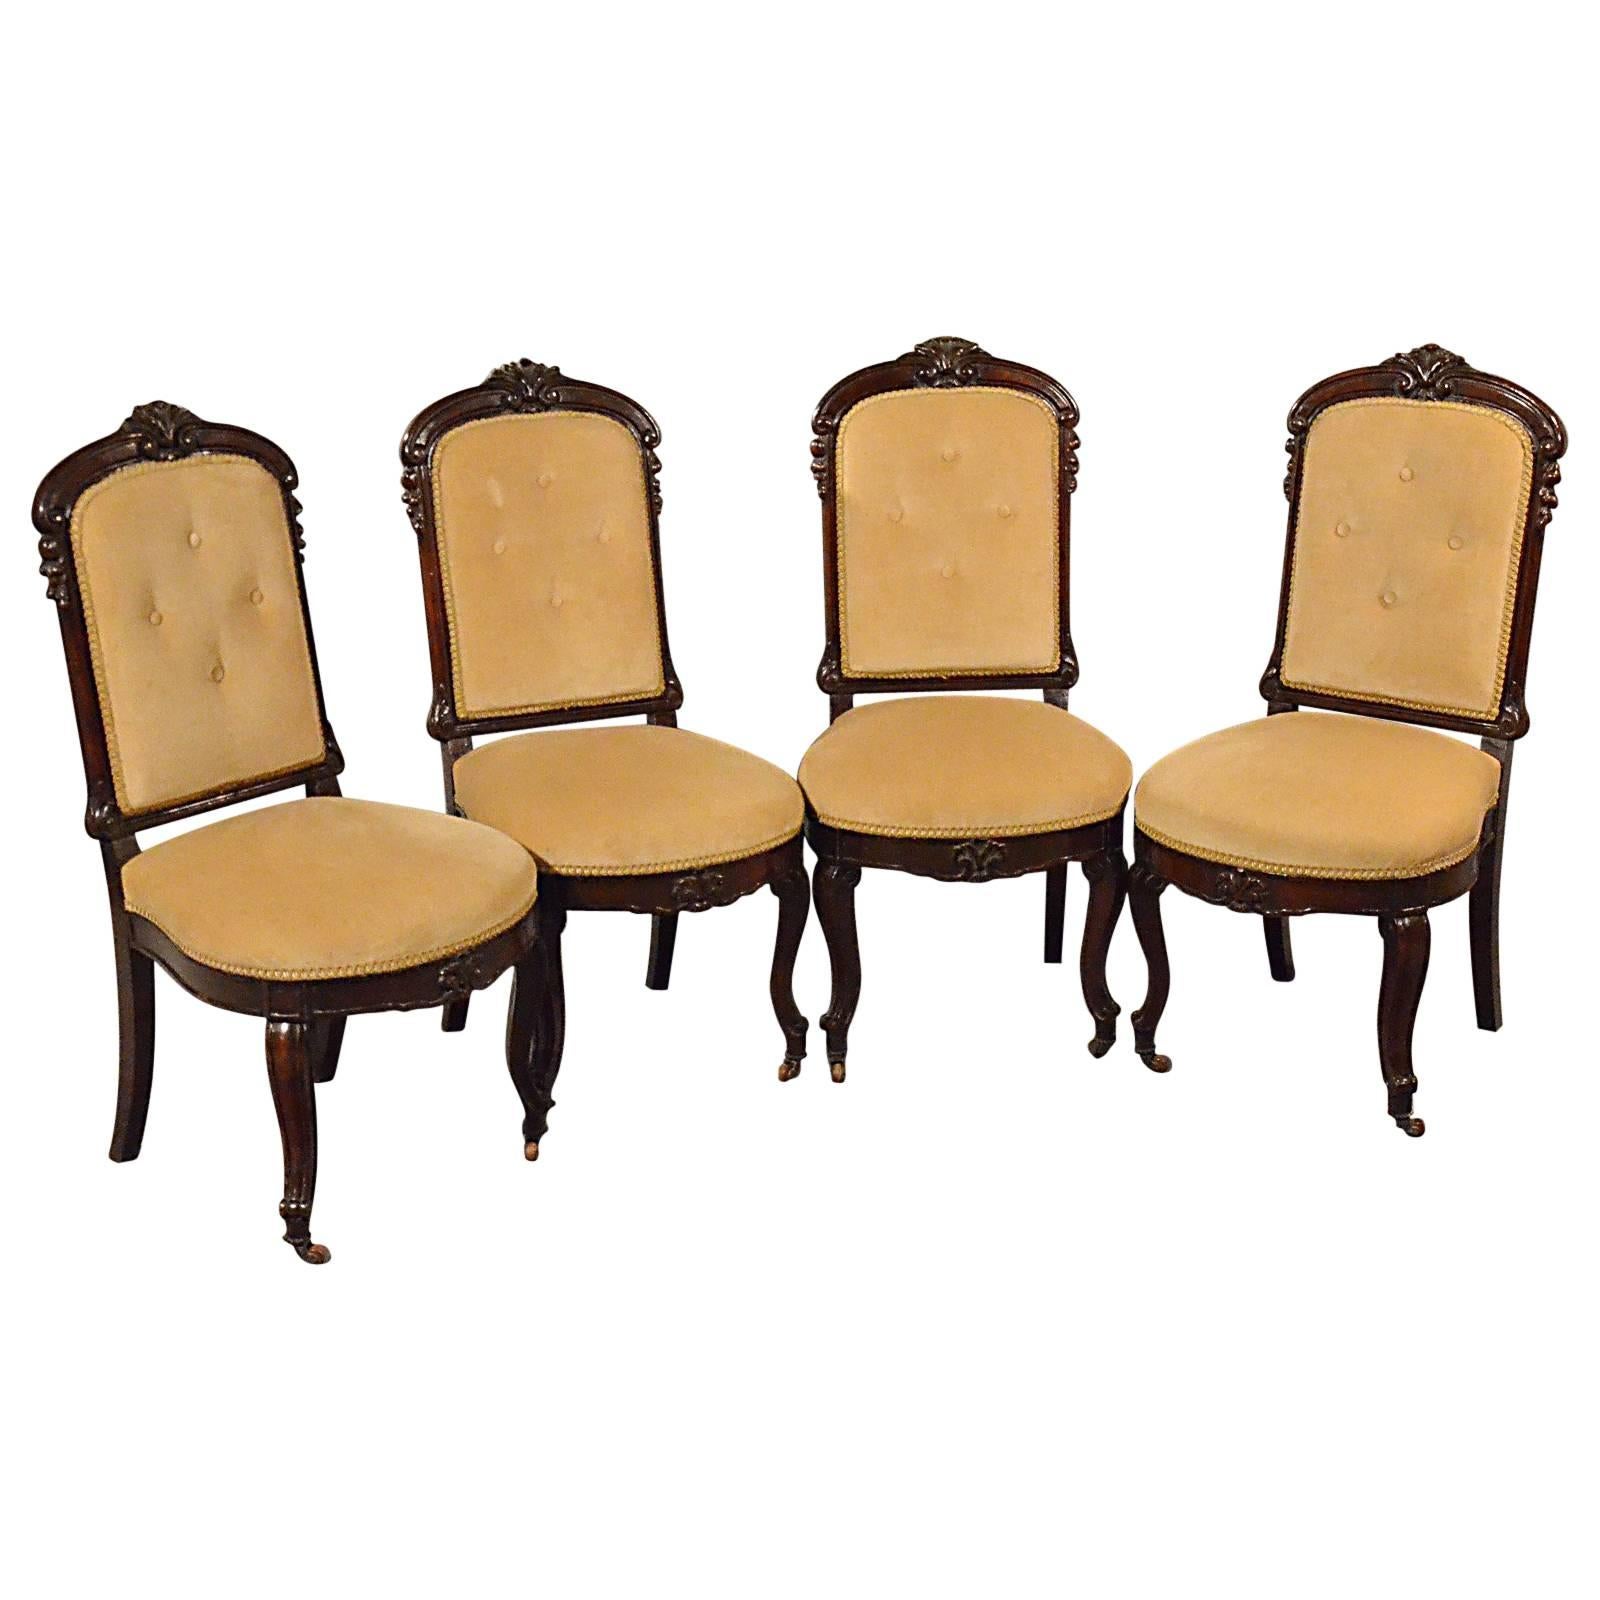 Antique Dining Chairs, Set of Four English Victorian Mahogany, circa 1890